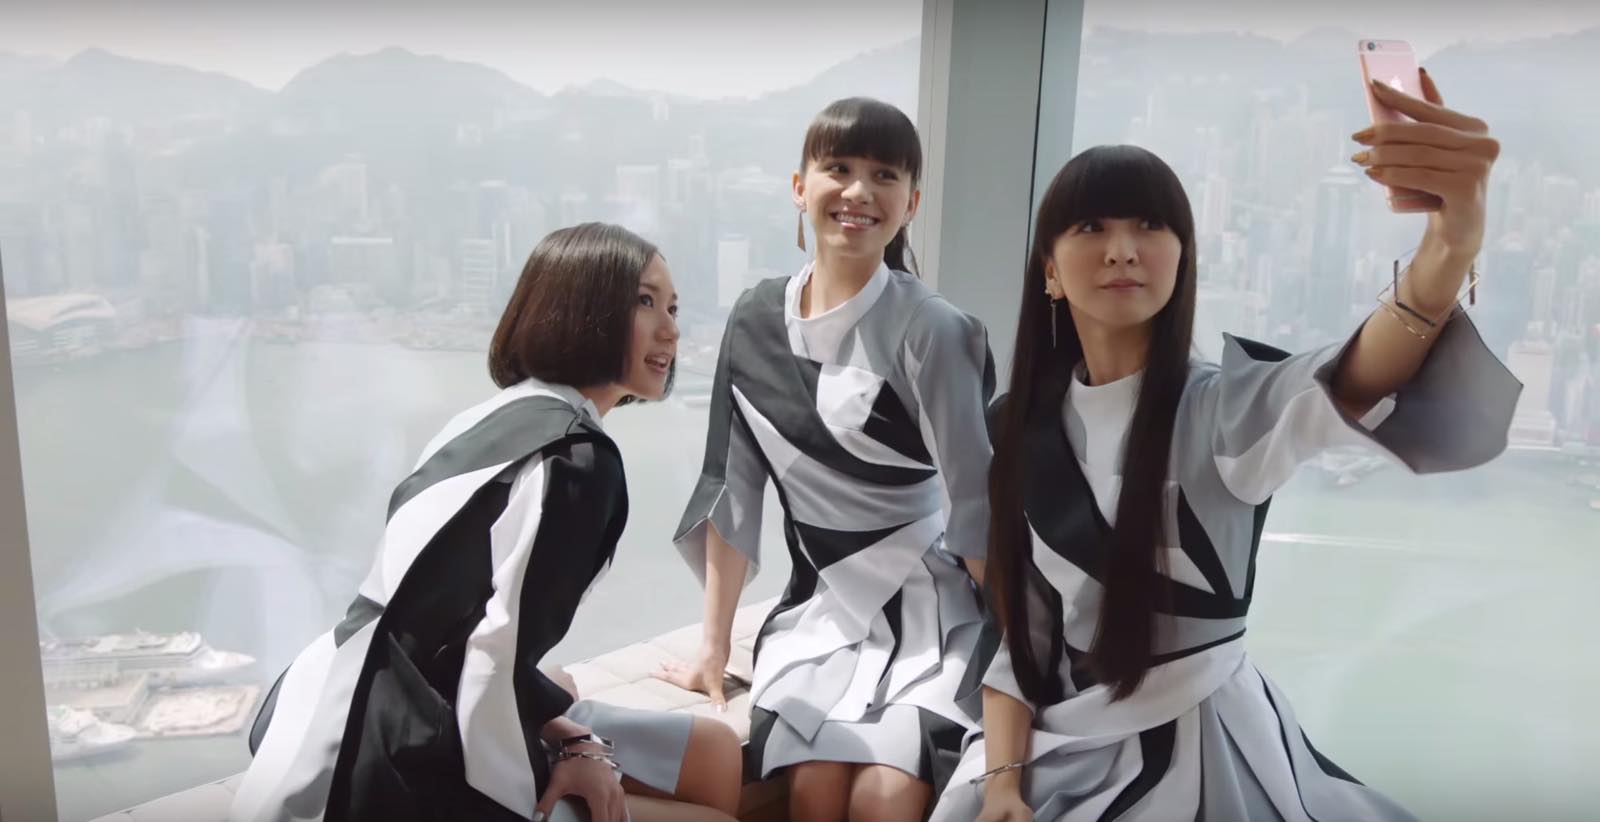 Perfume Takes Selfies in the Promotional Video for the New iPhone 6S!